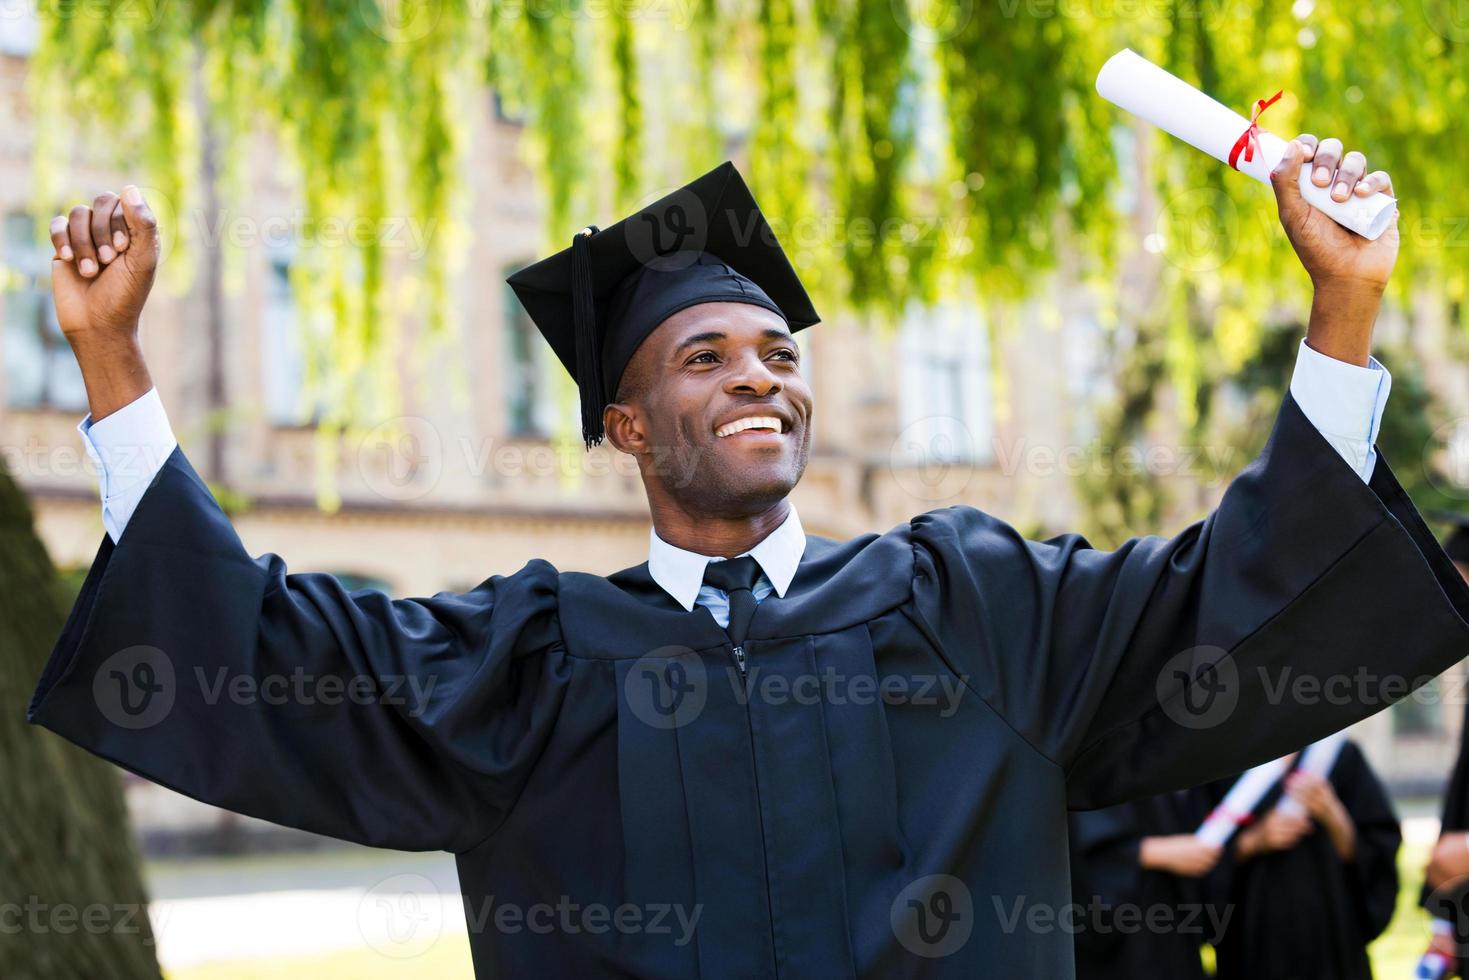 I have finally graduated Happy young African man in graduation gowns holding diploma and rising arms up while his friends standing in the background photo